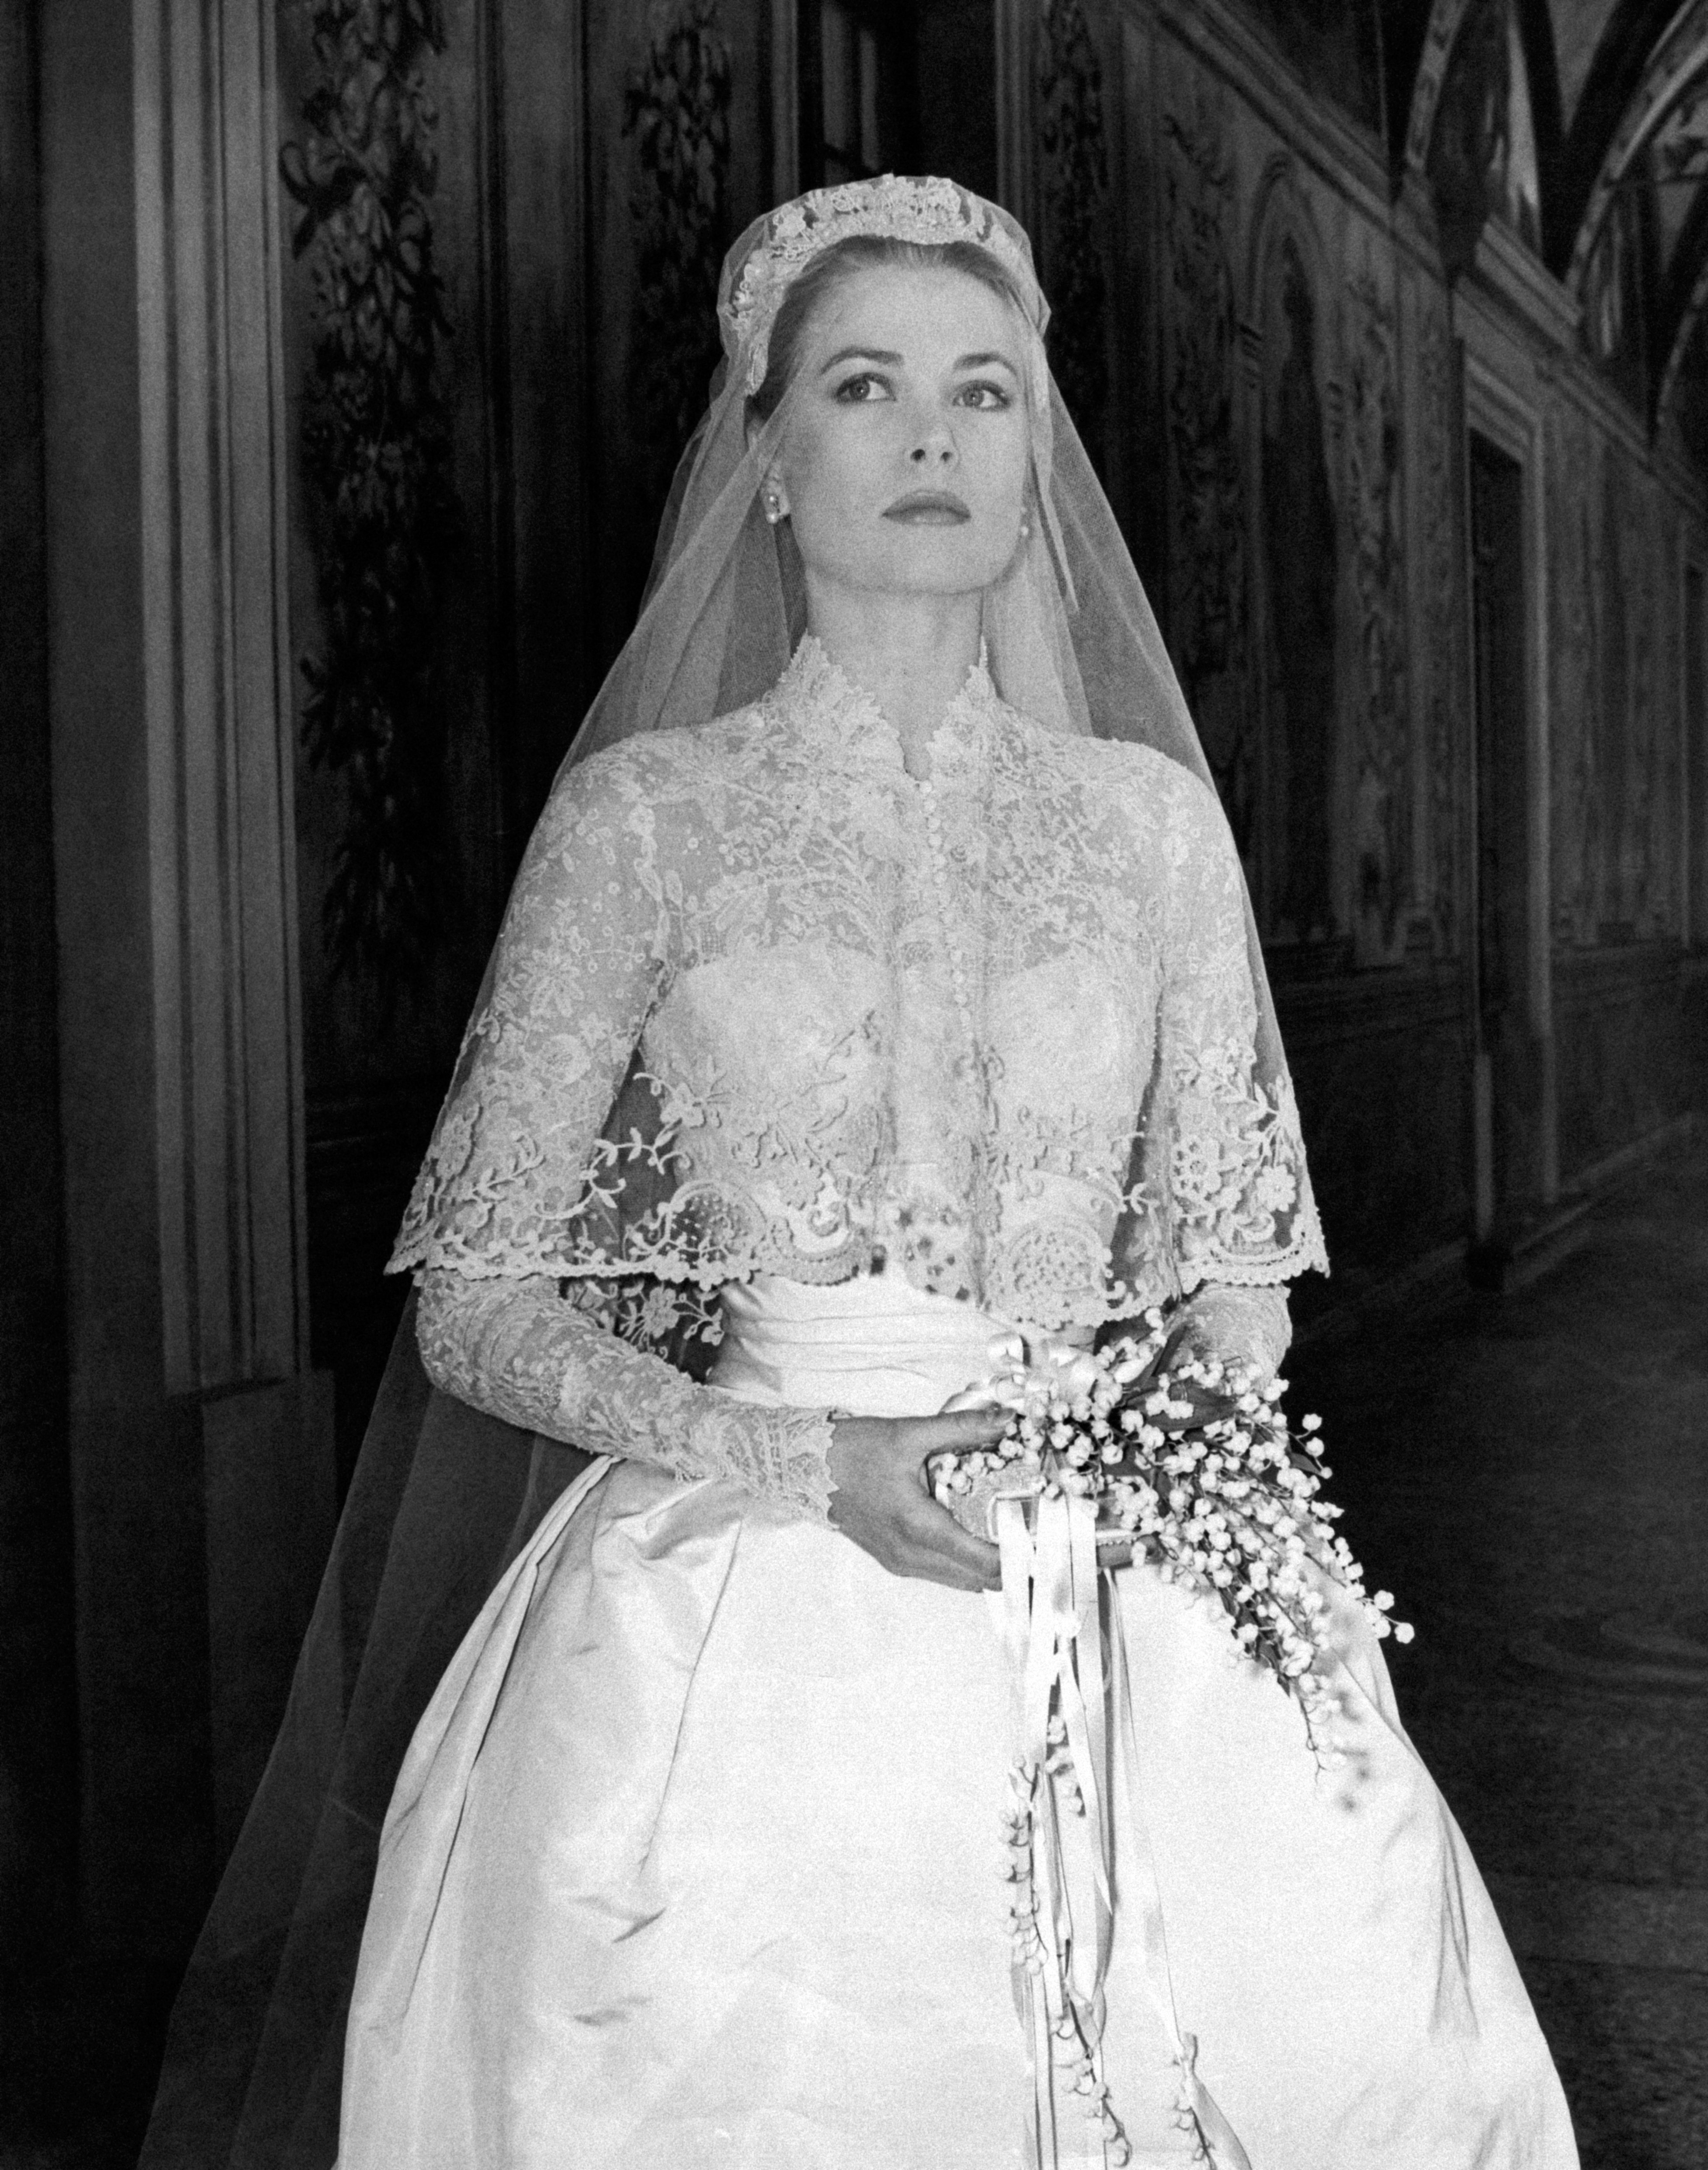 Grace Kelly in her bridal dress during her wedding in Monaco on April 18, 1956 | Source: Getty Images